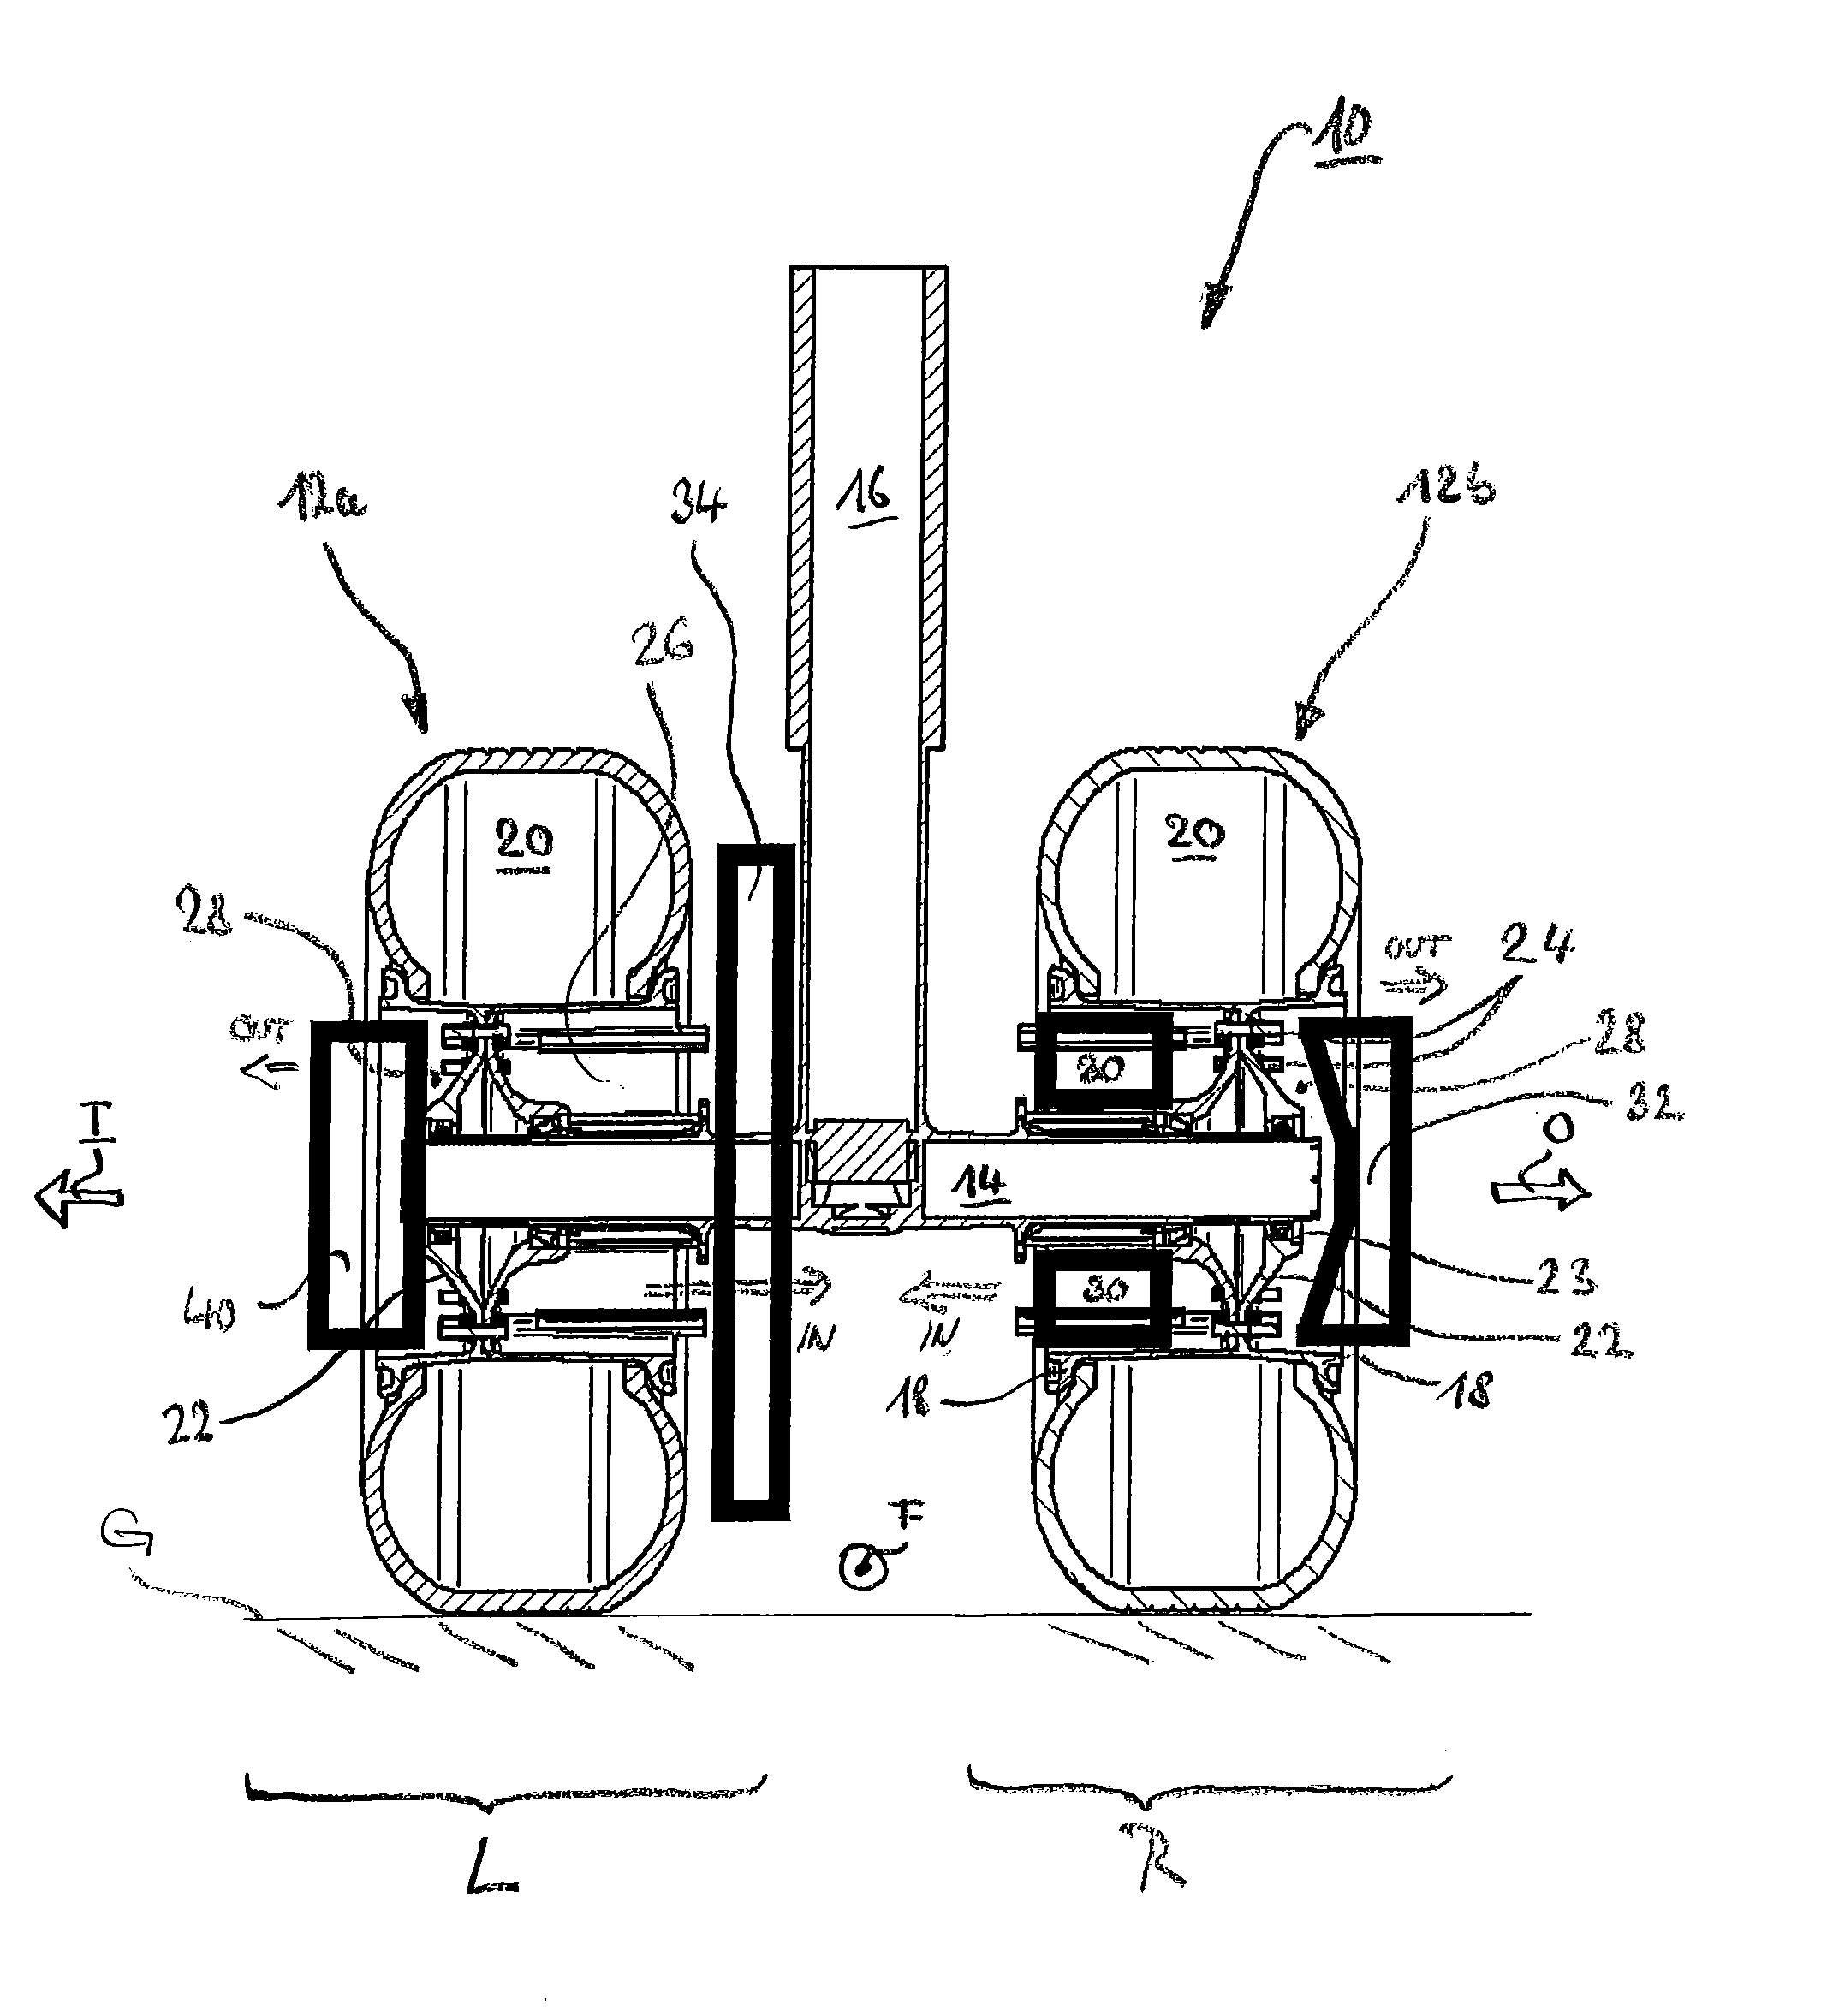 Drive unit for aircraft landing gear with integrated cooling